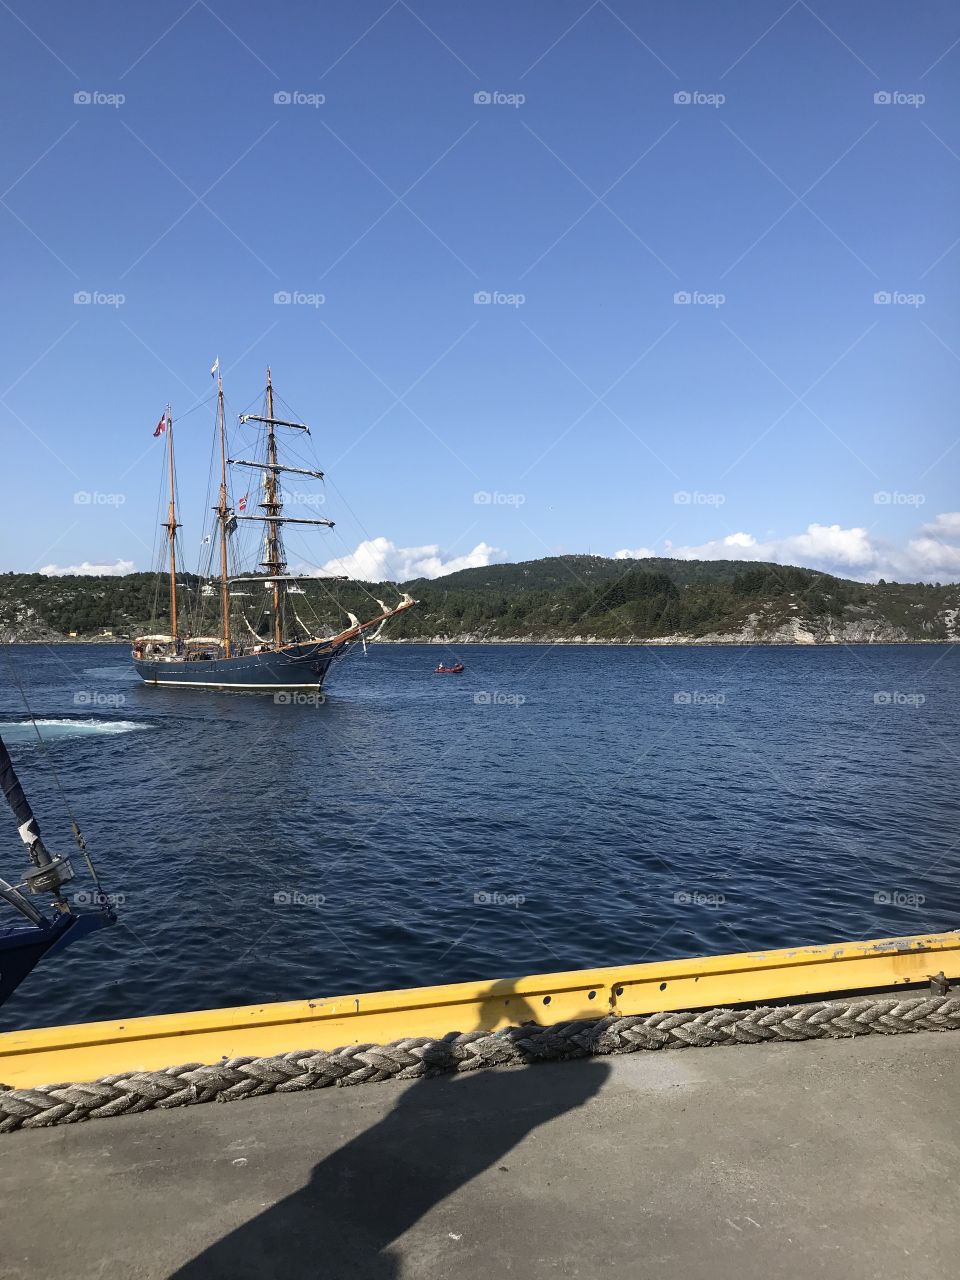 Sailboat arriving “Bekkjarvik” in Austevoll in Norway. The sailboat was coming from Denmark. 🇩🇰